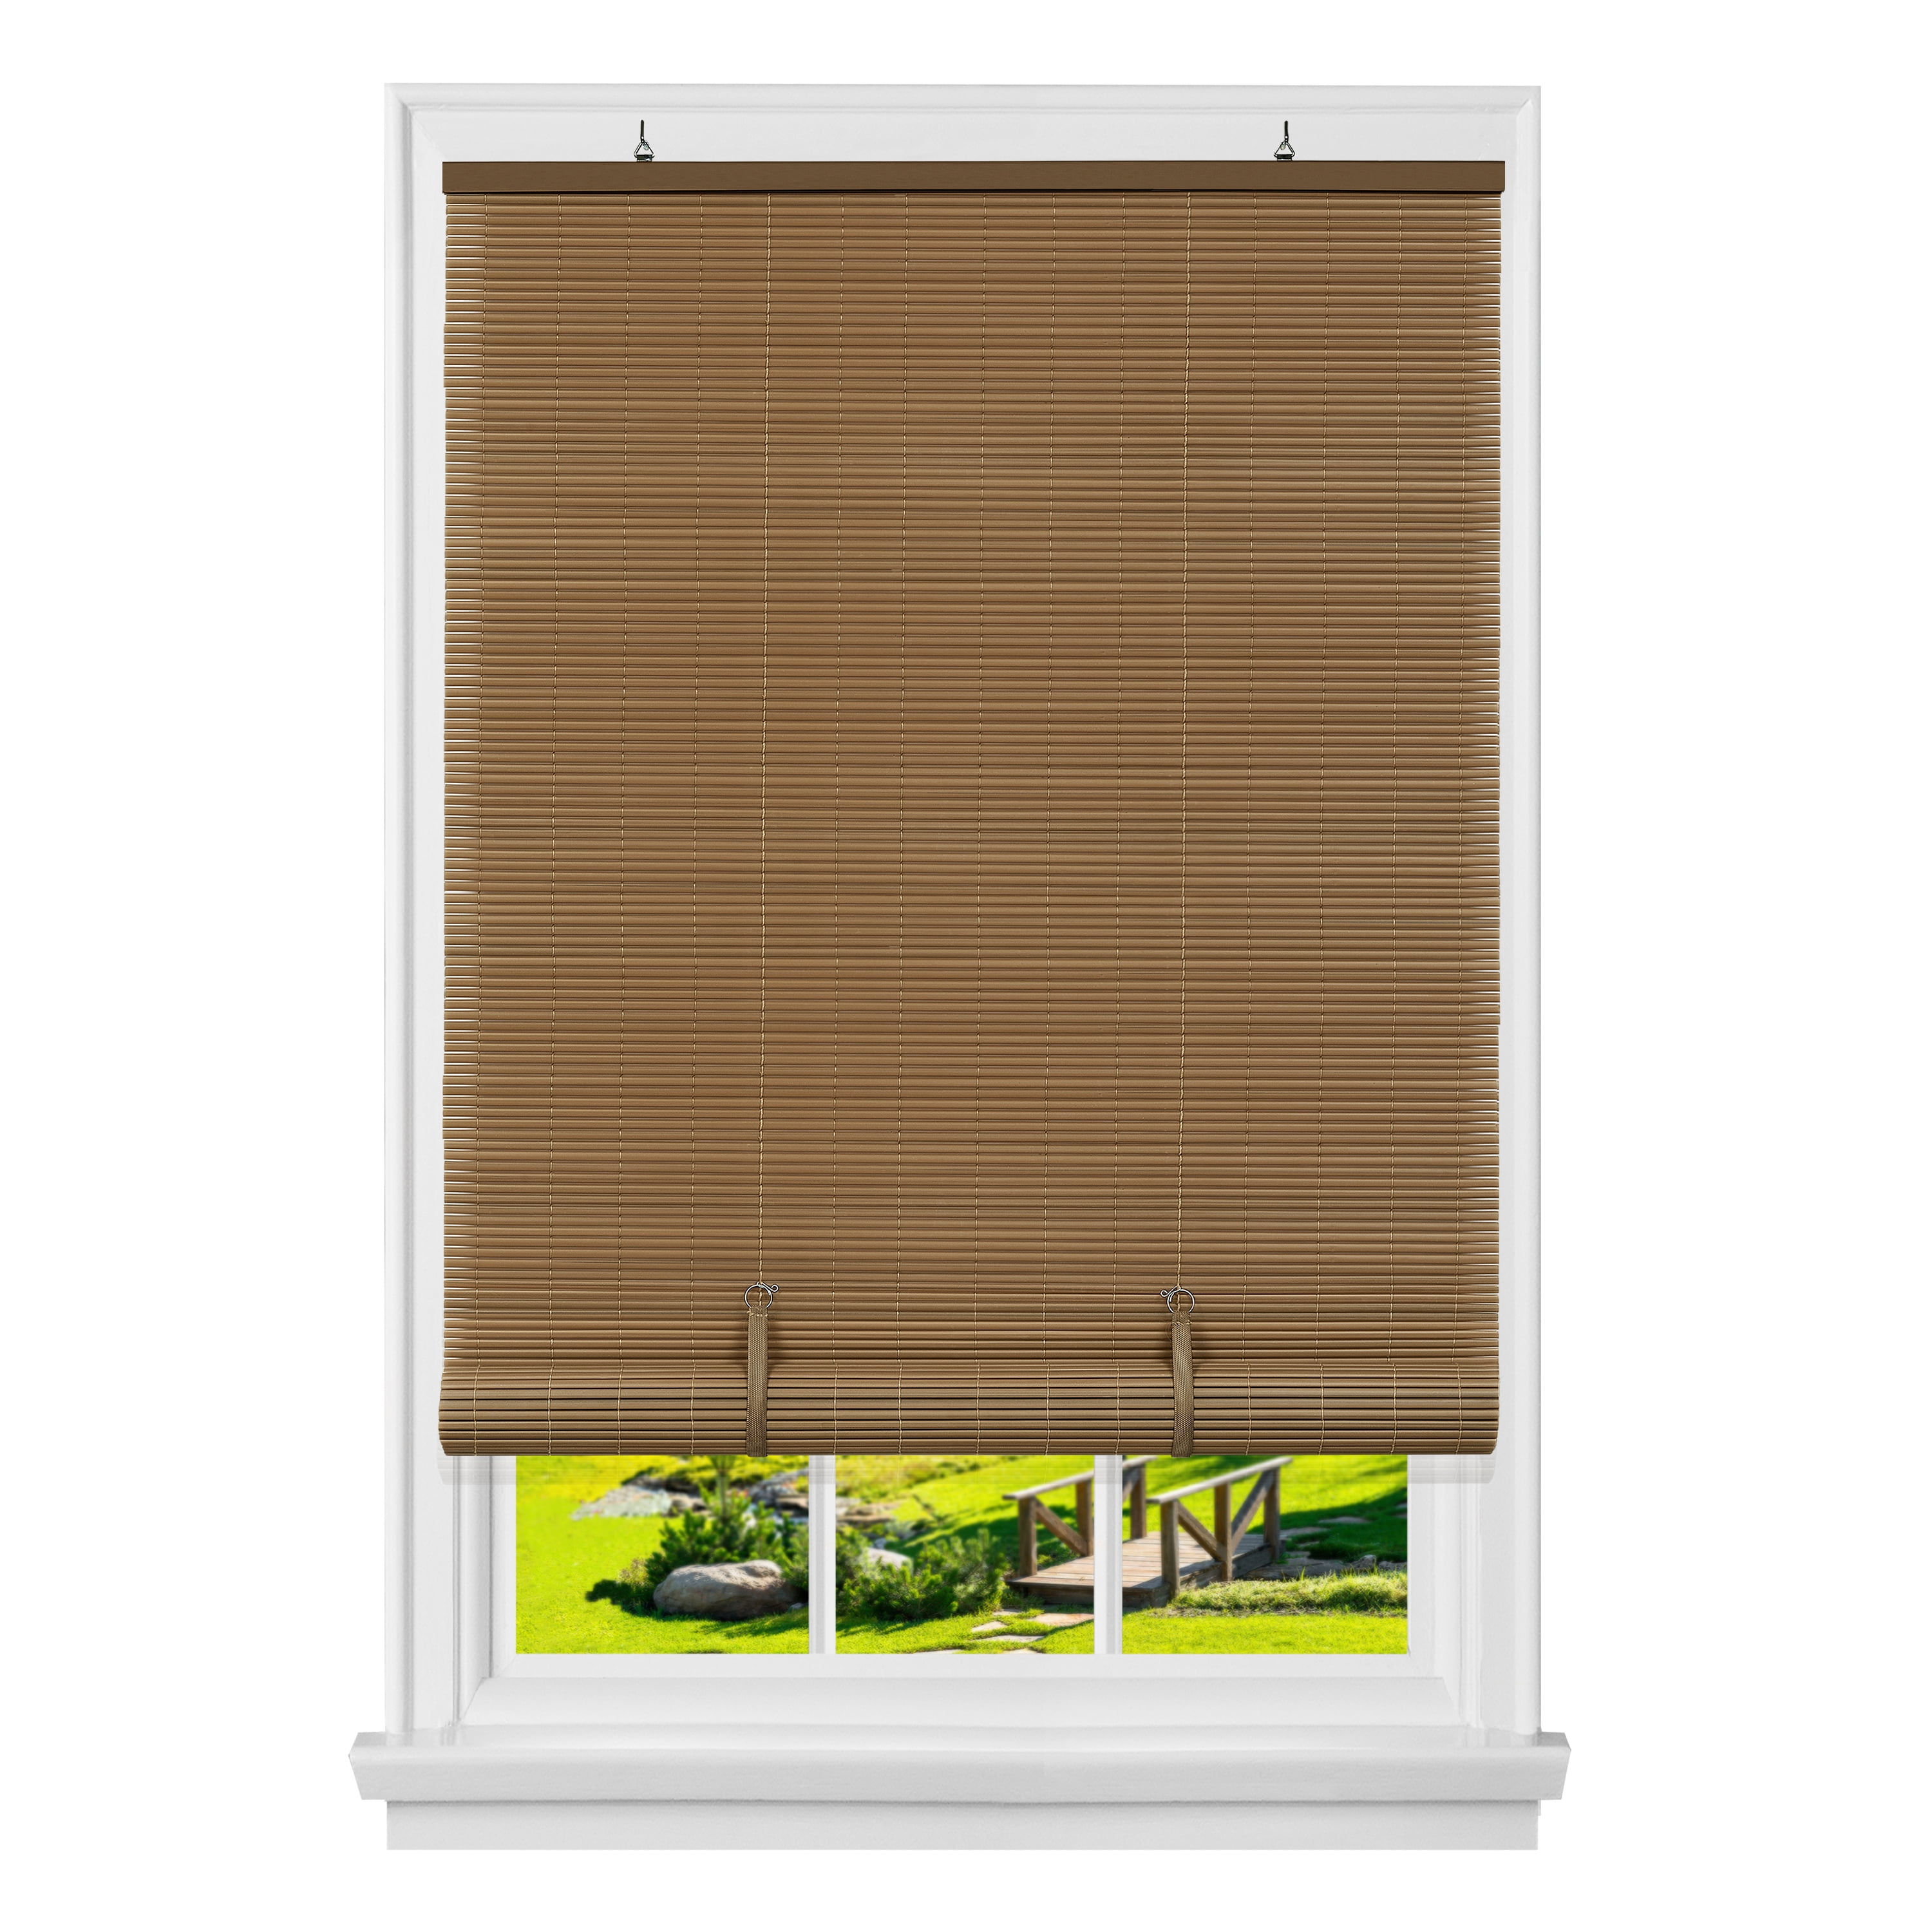 Achim Soco36wd06 36 X 72 In. Cordless Solstice Vinyl Roll-up Blind, Woodtone